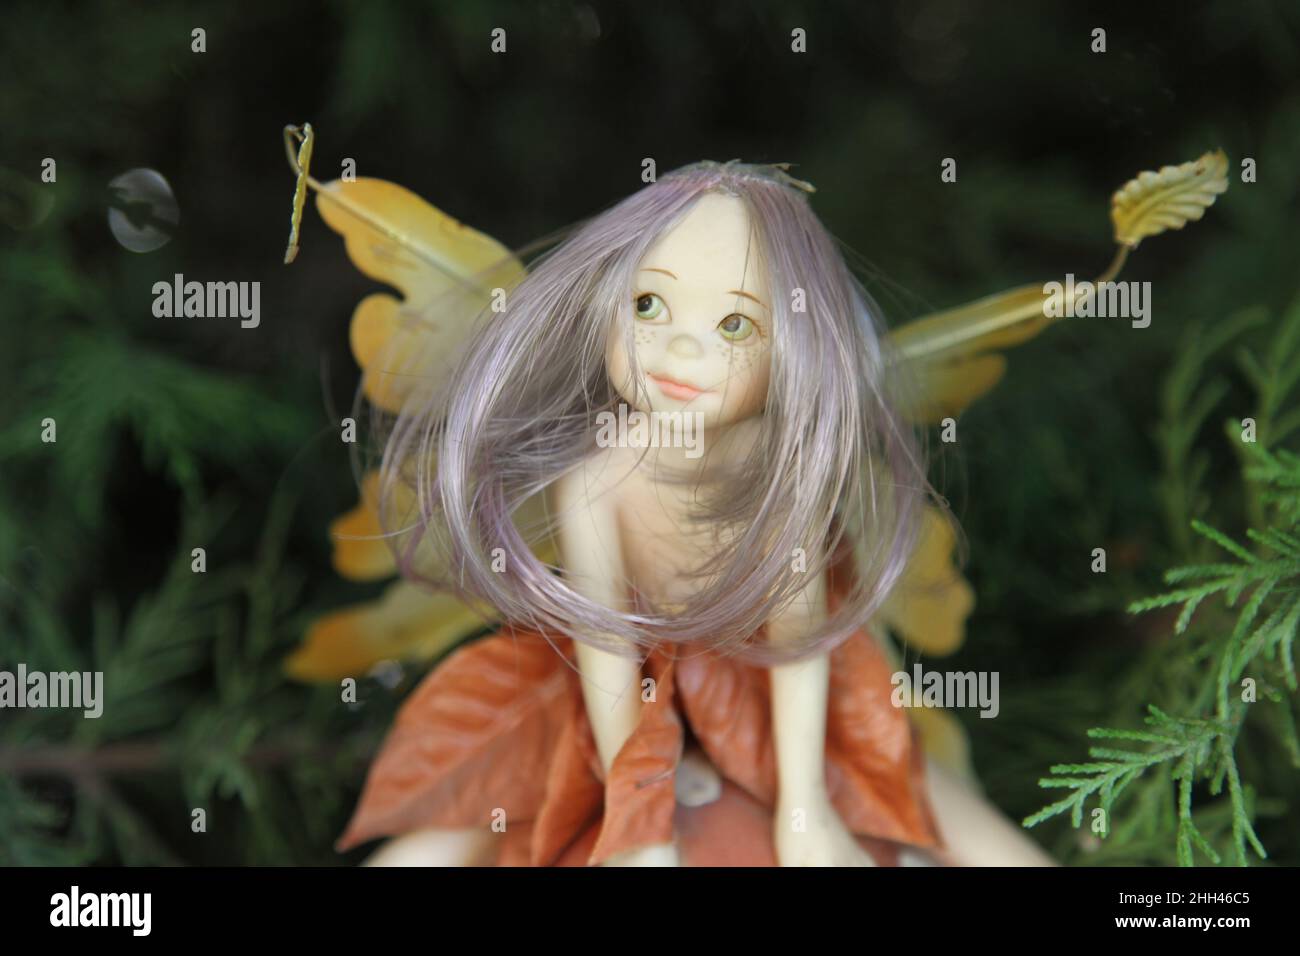 A long-haired fairy with wings figurine sitting in the garden. Close up Stock Photo